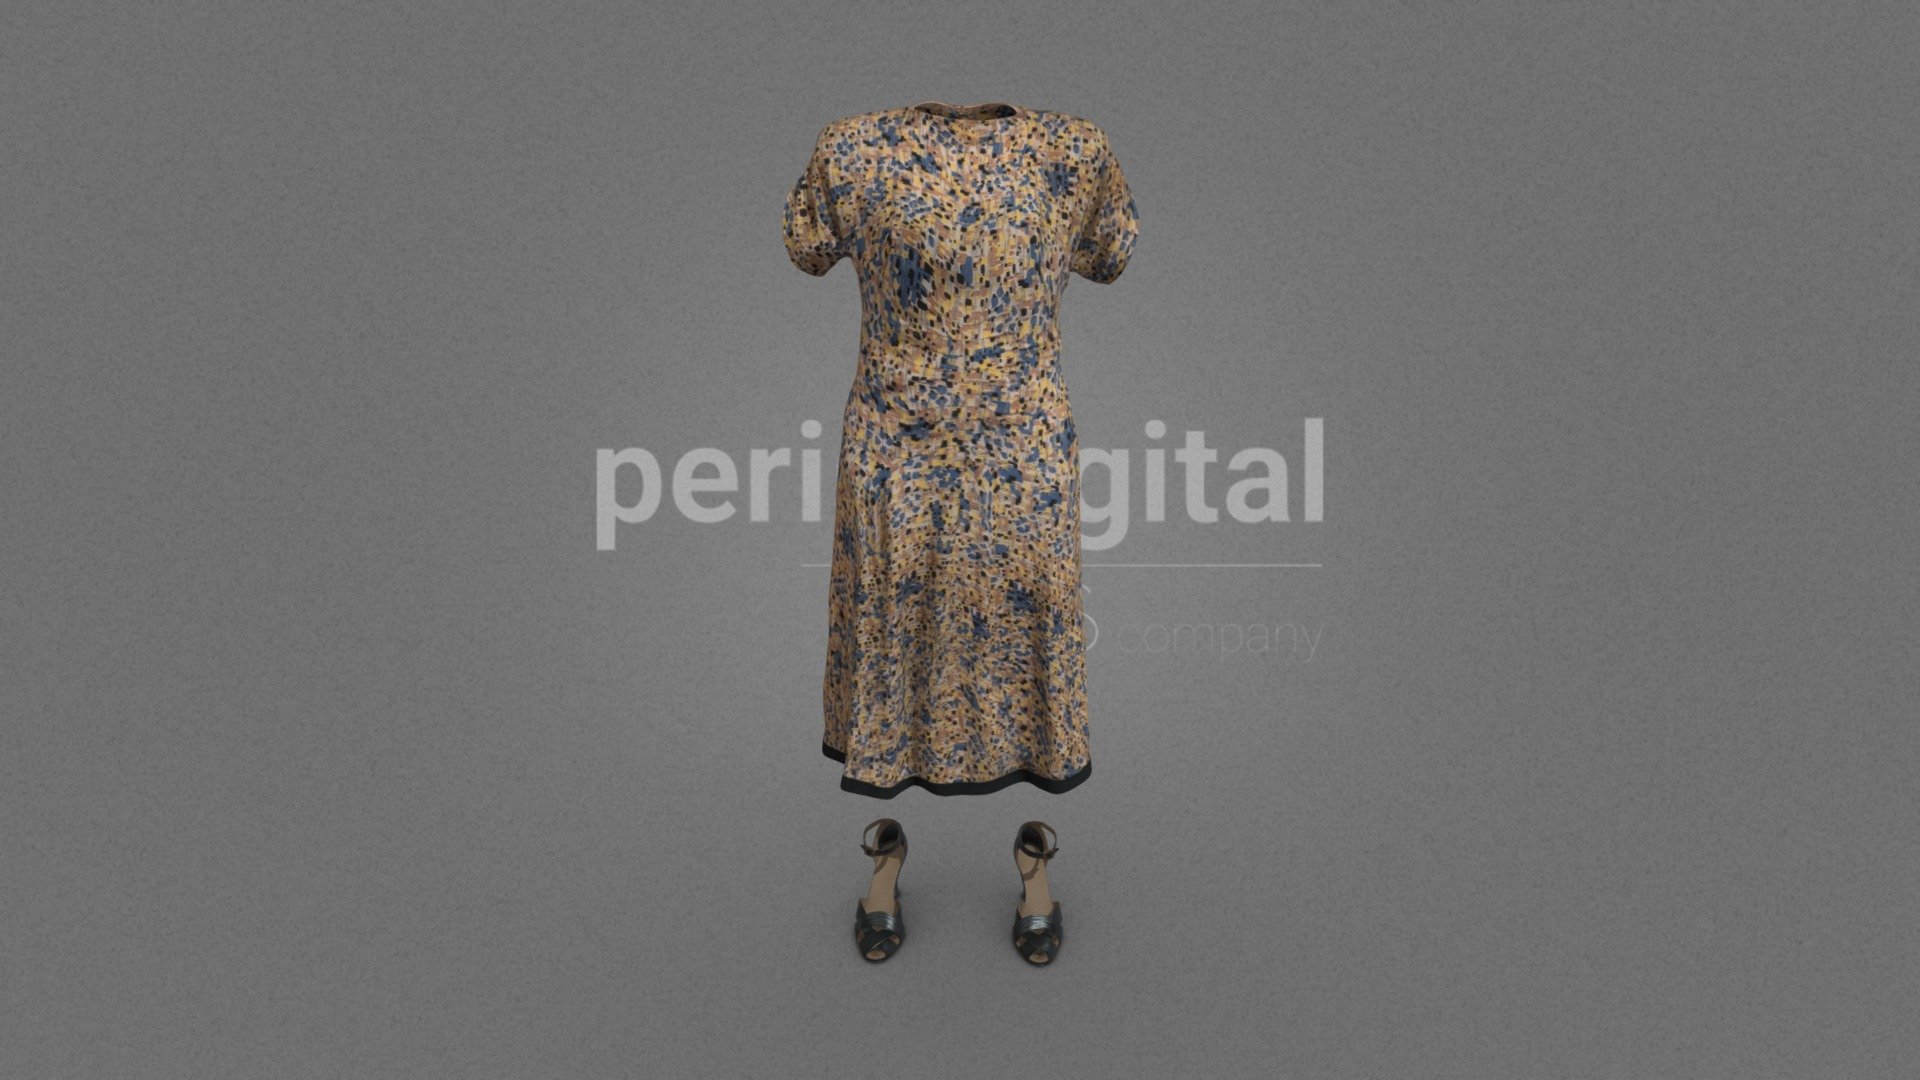 Brick printed dress in shades of blue, brown, white, yellow and black with black border at the bottom of the ruffled short sleeves, closed collar, buttons on the back and bow at the waist of the back; black leather heeled sandals crossed straps and ankle strap.




They are optimized for use in 3D scenes of medium/high polygonalization and optimized for rendering.

We do not include characters, but they are positioned for you to include and adjust your own character.

They have a model LOW (_LODRIG) inside the Blender file (included in the AdditionalFiles), which you can use for vertex weighting or cloth simulation and thus, make the transfer of vertices or property masks from the LOW to the HIGH** model.

**We have included the texture maps in high resolution, so you can make extreme point of view with your 3D cameras, as well as the Blender file so you can edit any aspect of the set. 

Enjoy it.

Web: https://peris.digital/ - 40s Fashion Series - Woman 36 - Buy Royalty Free 3D model by Peris Digital (@perisdigital) 3d model